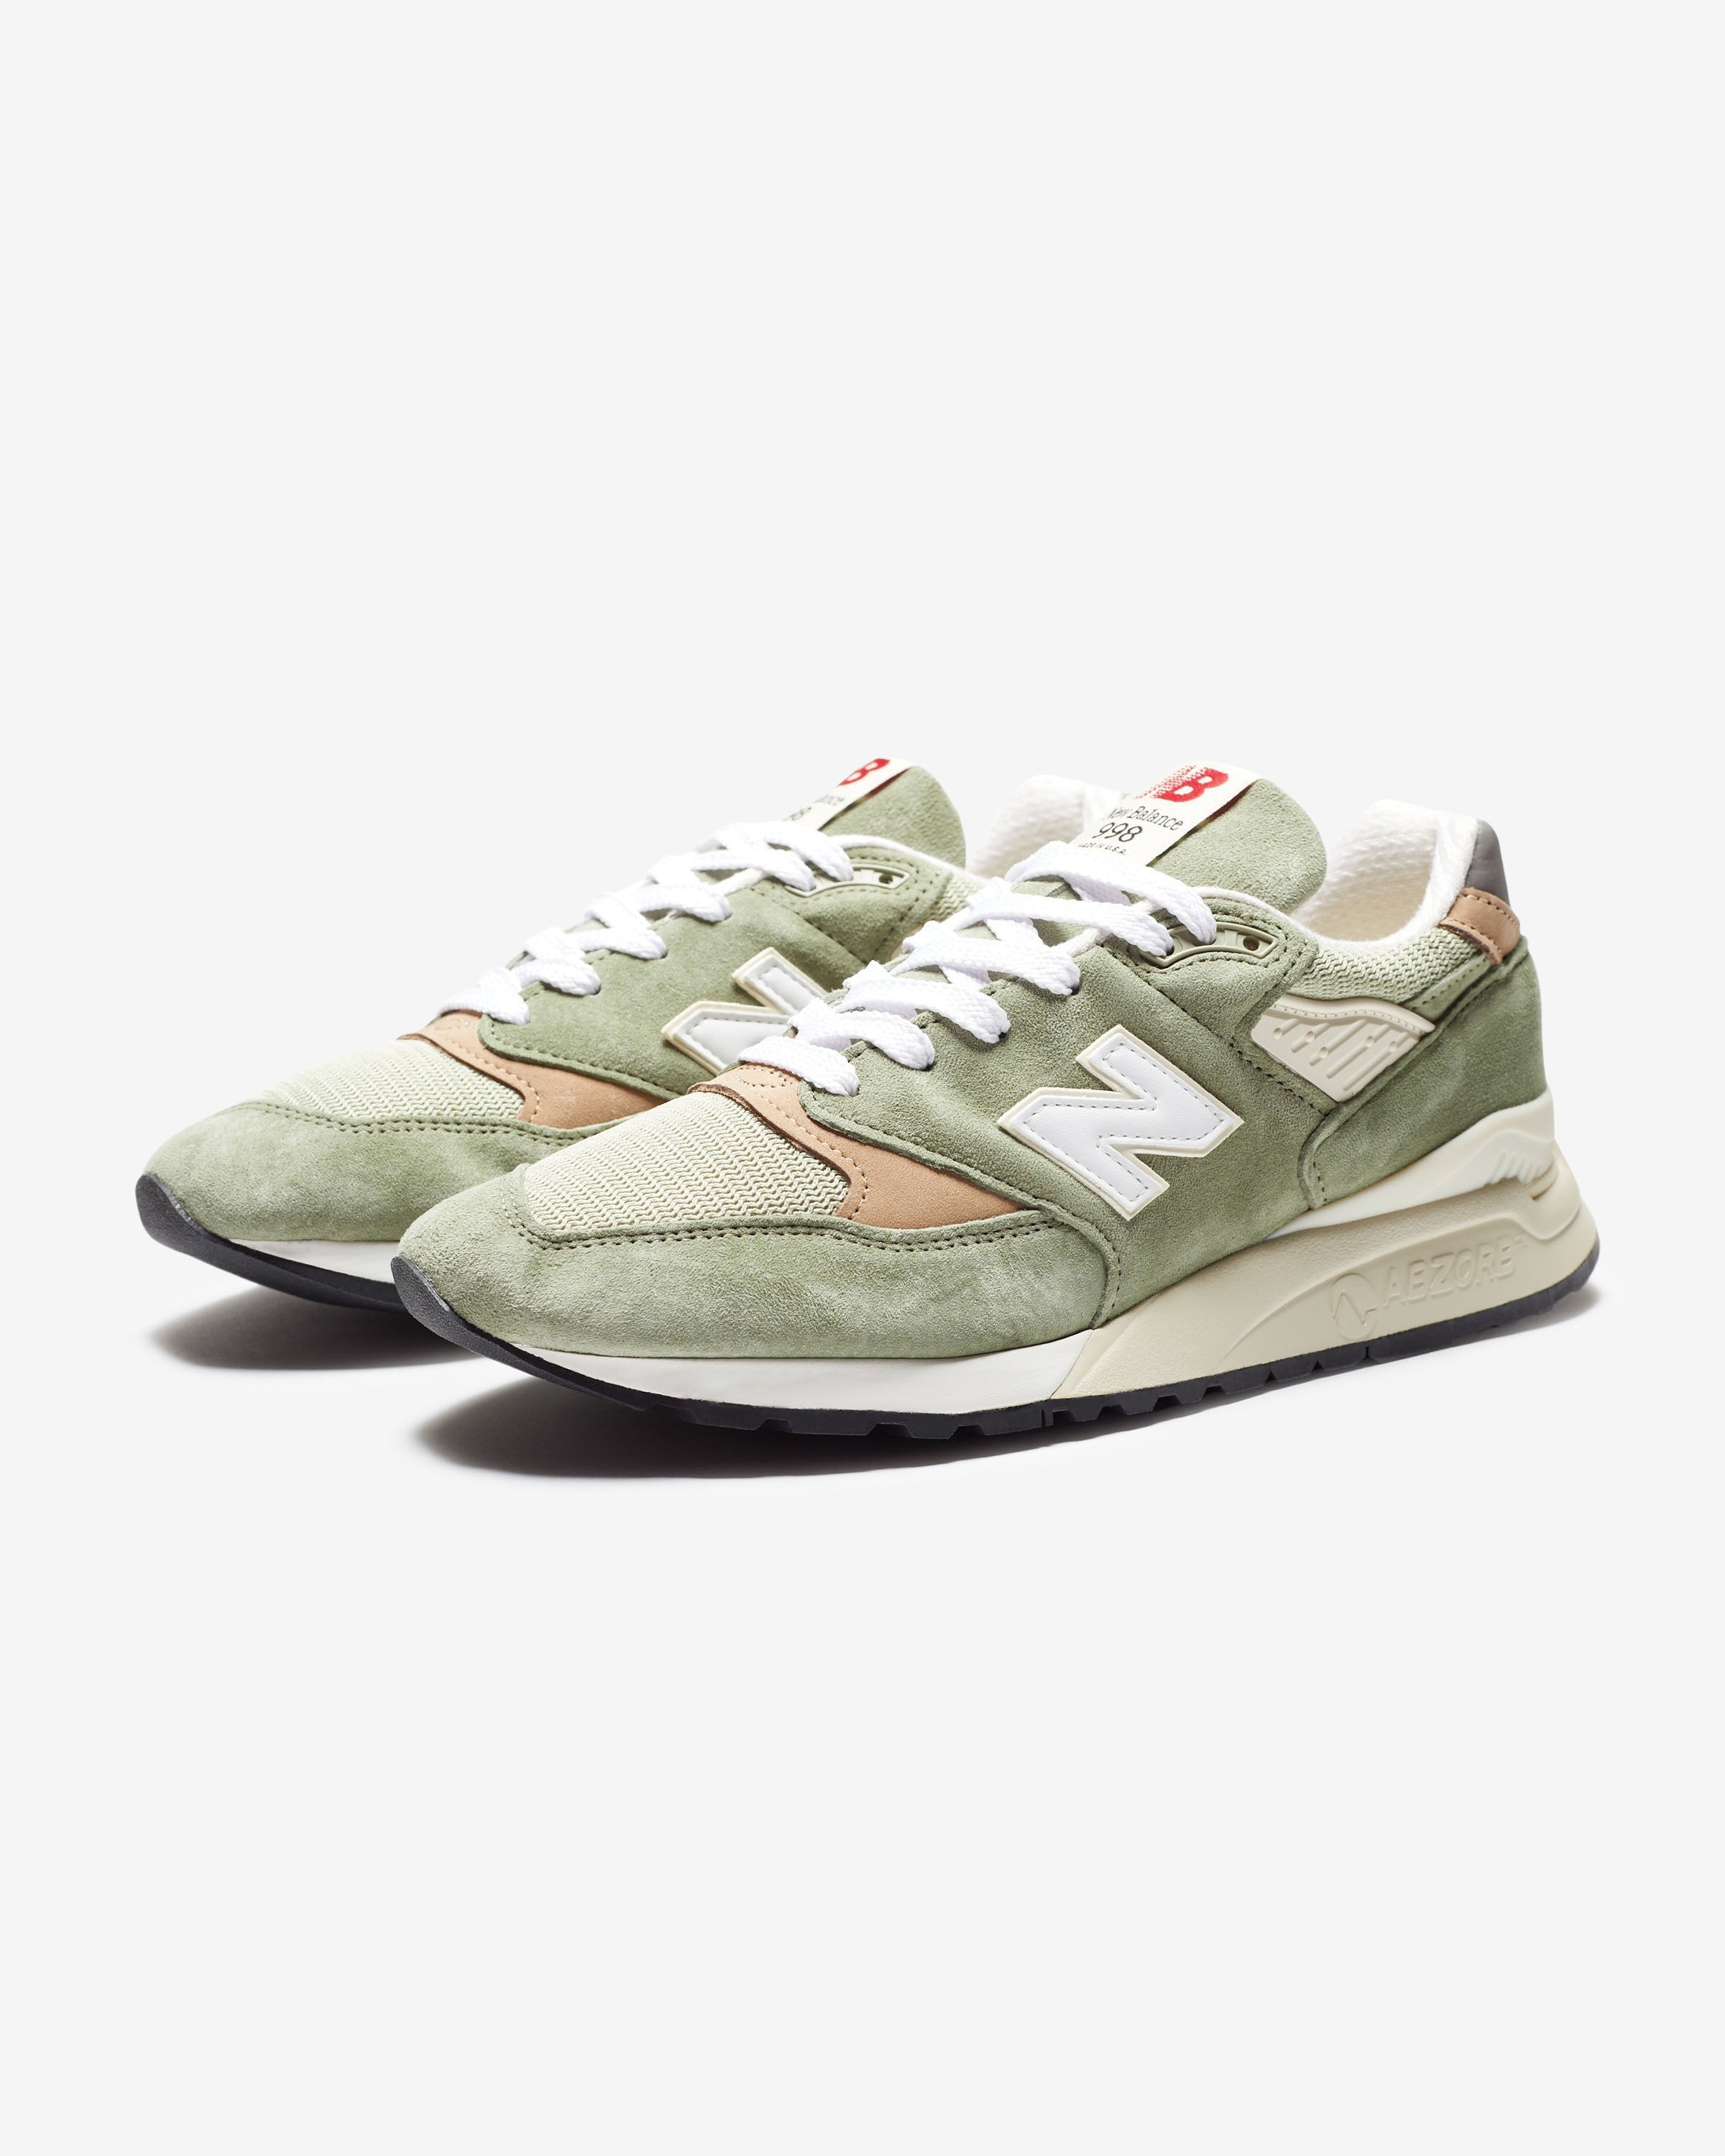 NEW BALANCE "MADE IN USA" 998 - OLIVE